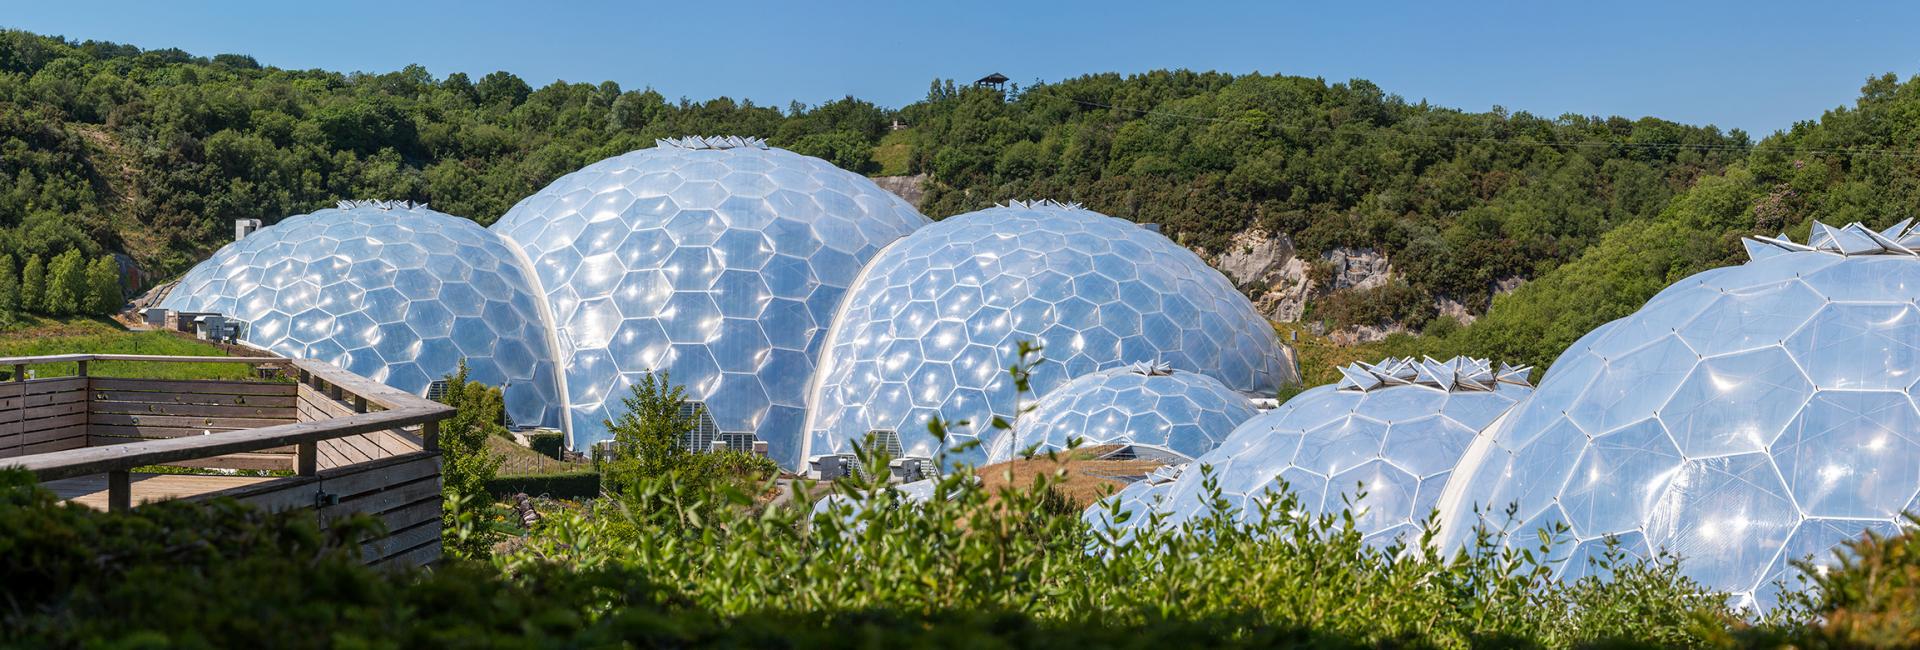 Eden Project Biomes panorama